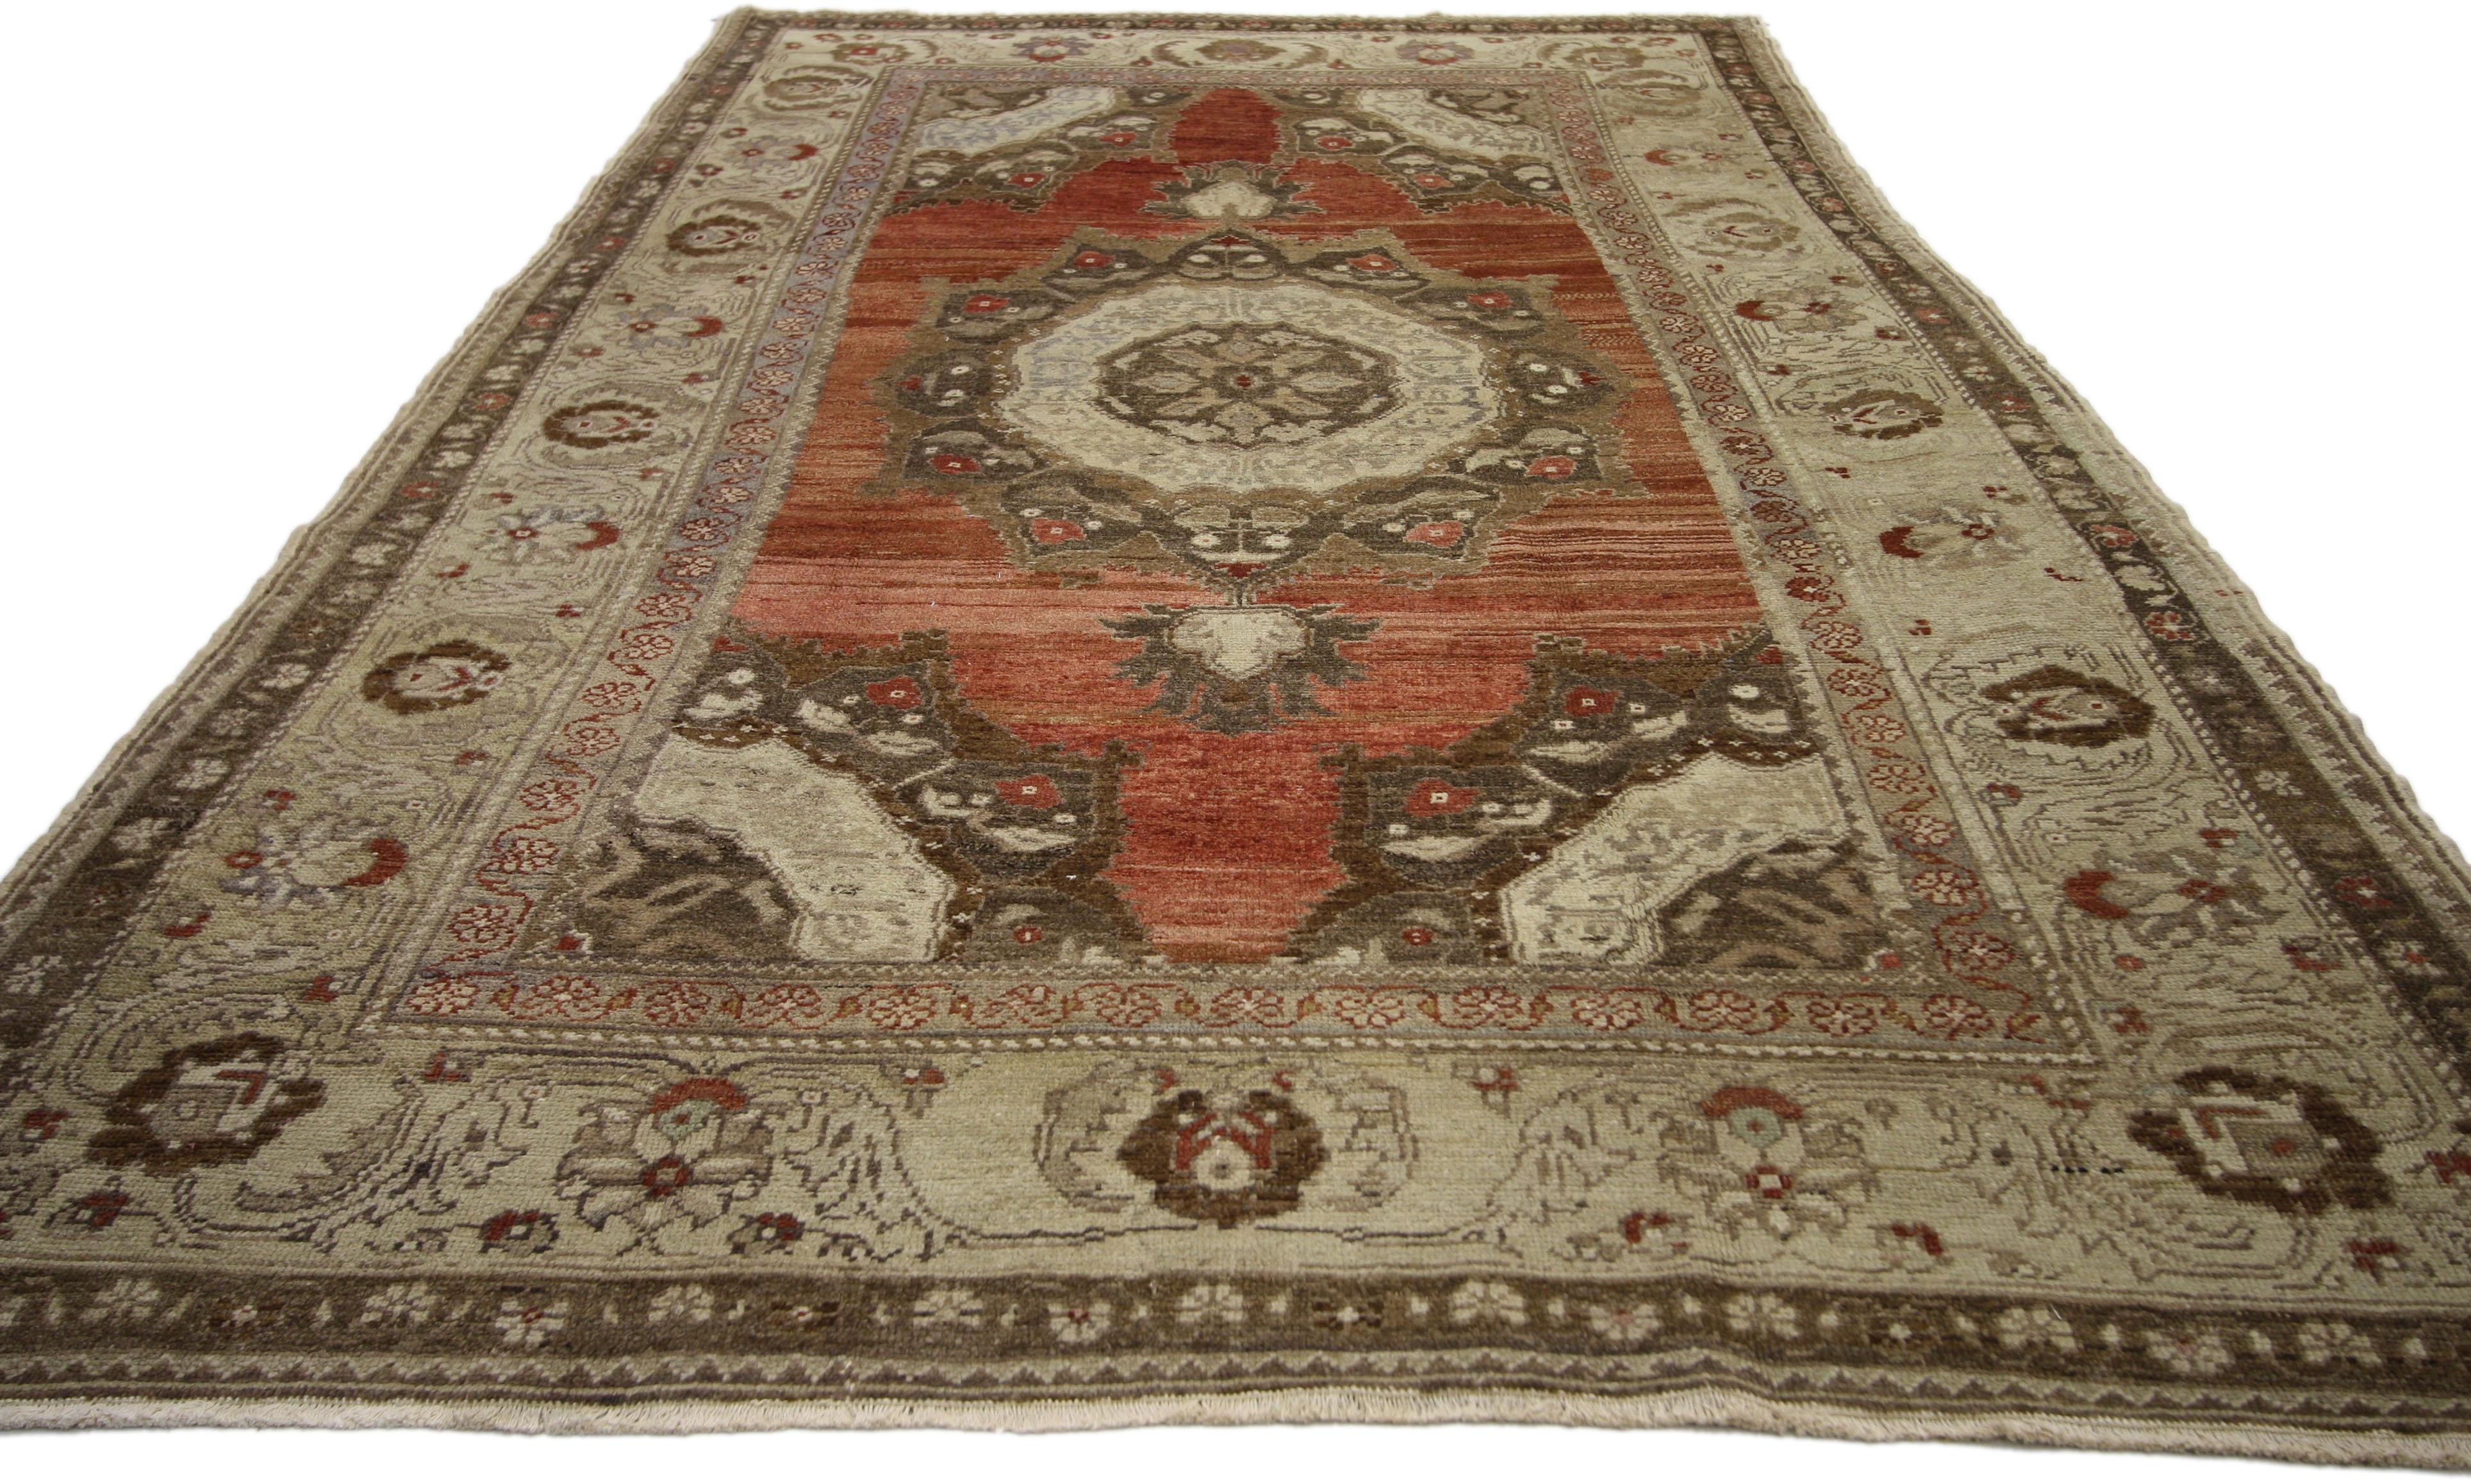 50756, vintage Turkish Oushak rug with rustic Artisan Bohemian style. This hand knotted wool vintage Turkish Oushak rug features a large lobed medallion with palmette pendants floating on a heavily abrashed brick red field. Corresponding quarter